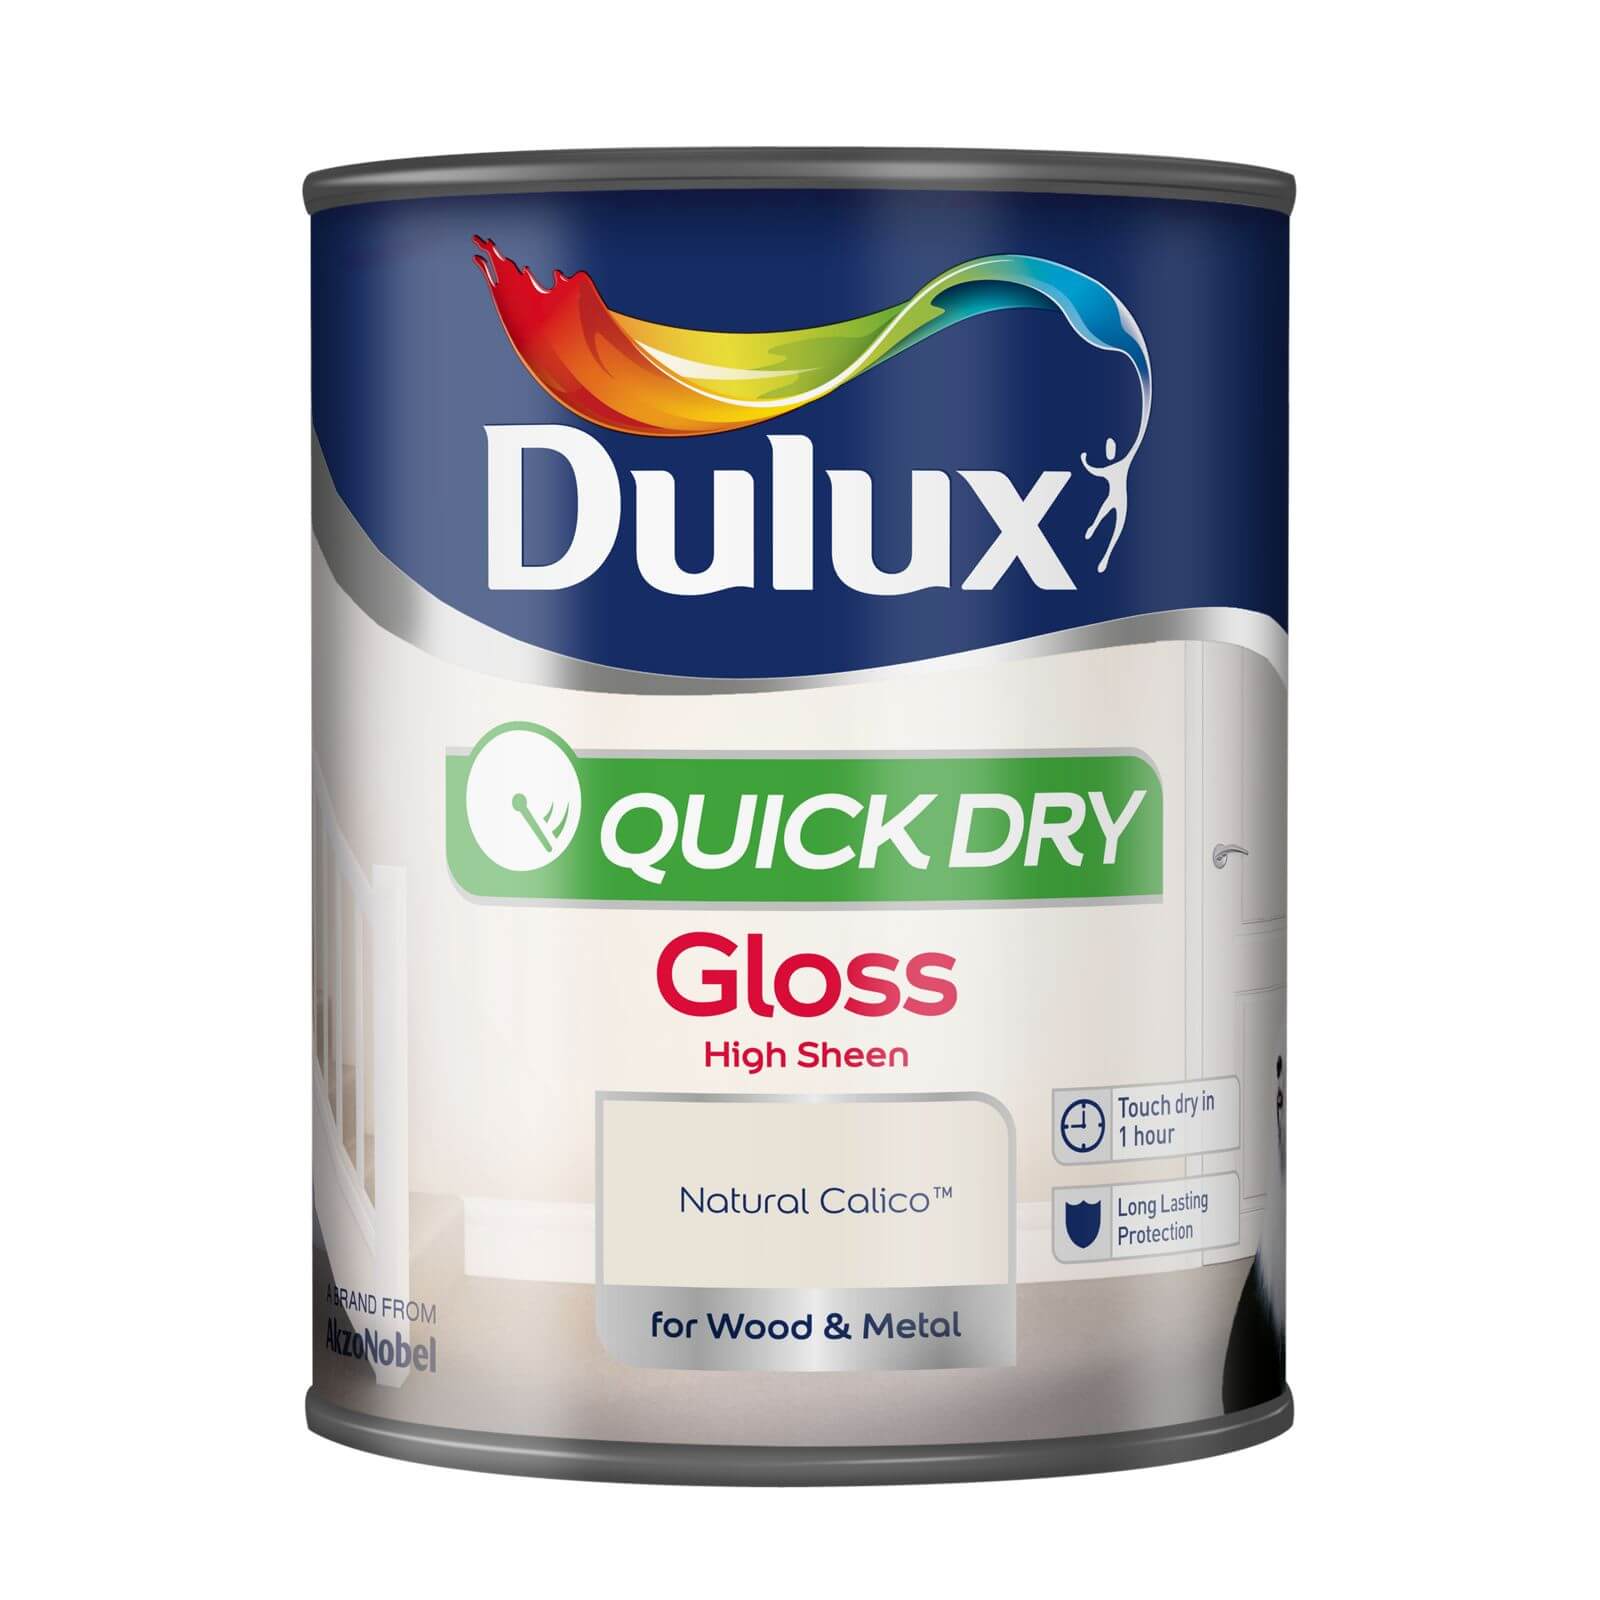 Dulux Quick Dry Gloss Paint Natural Calico - 750ml